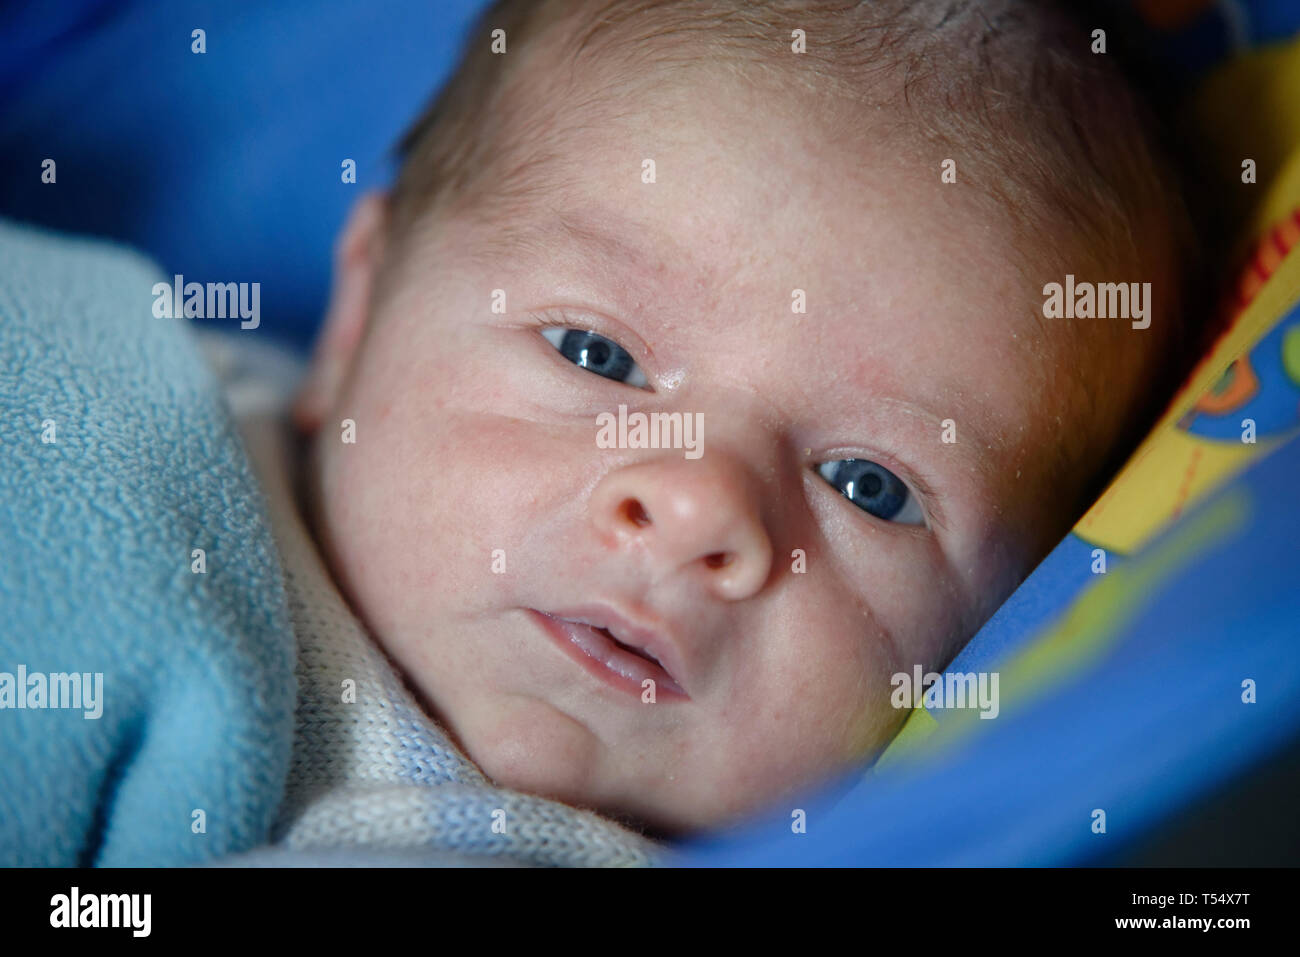 2 months old baby Stock Photo